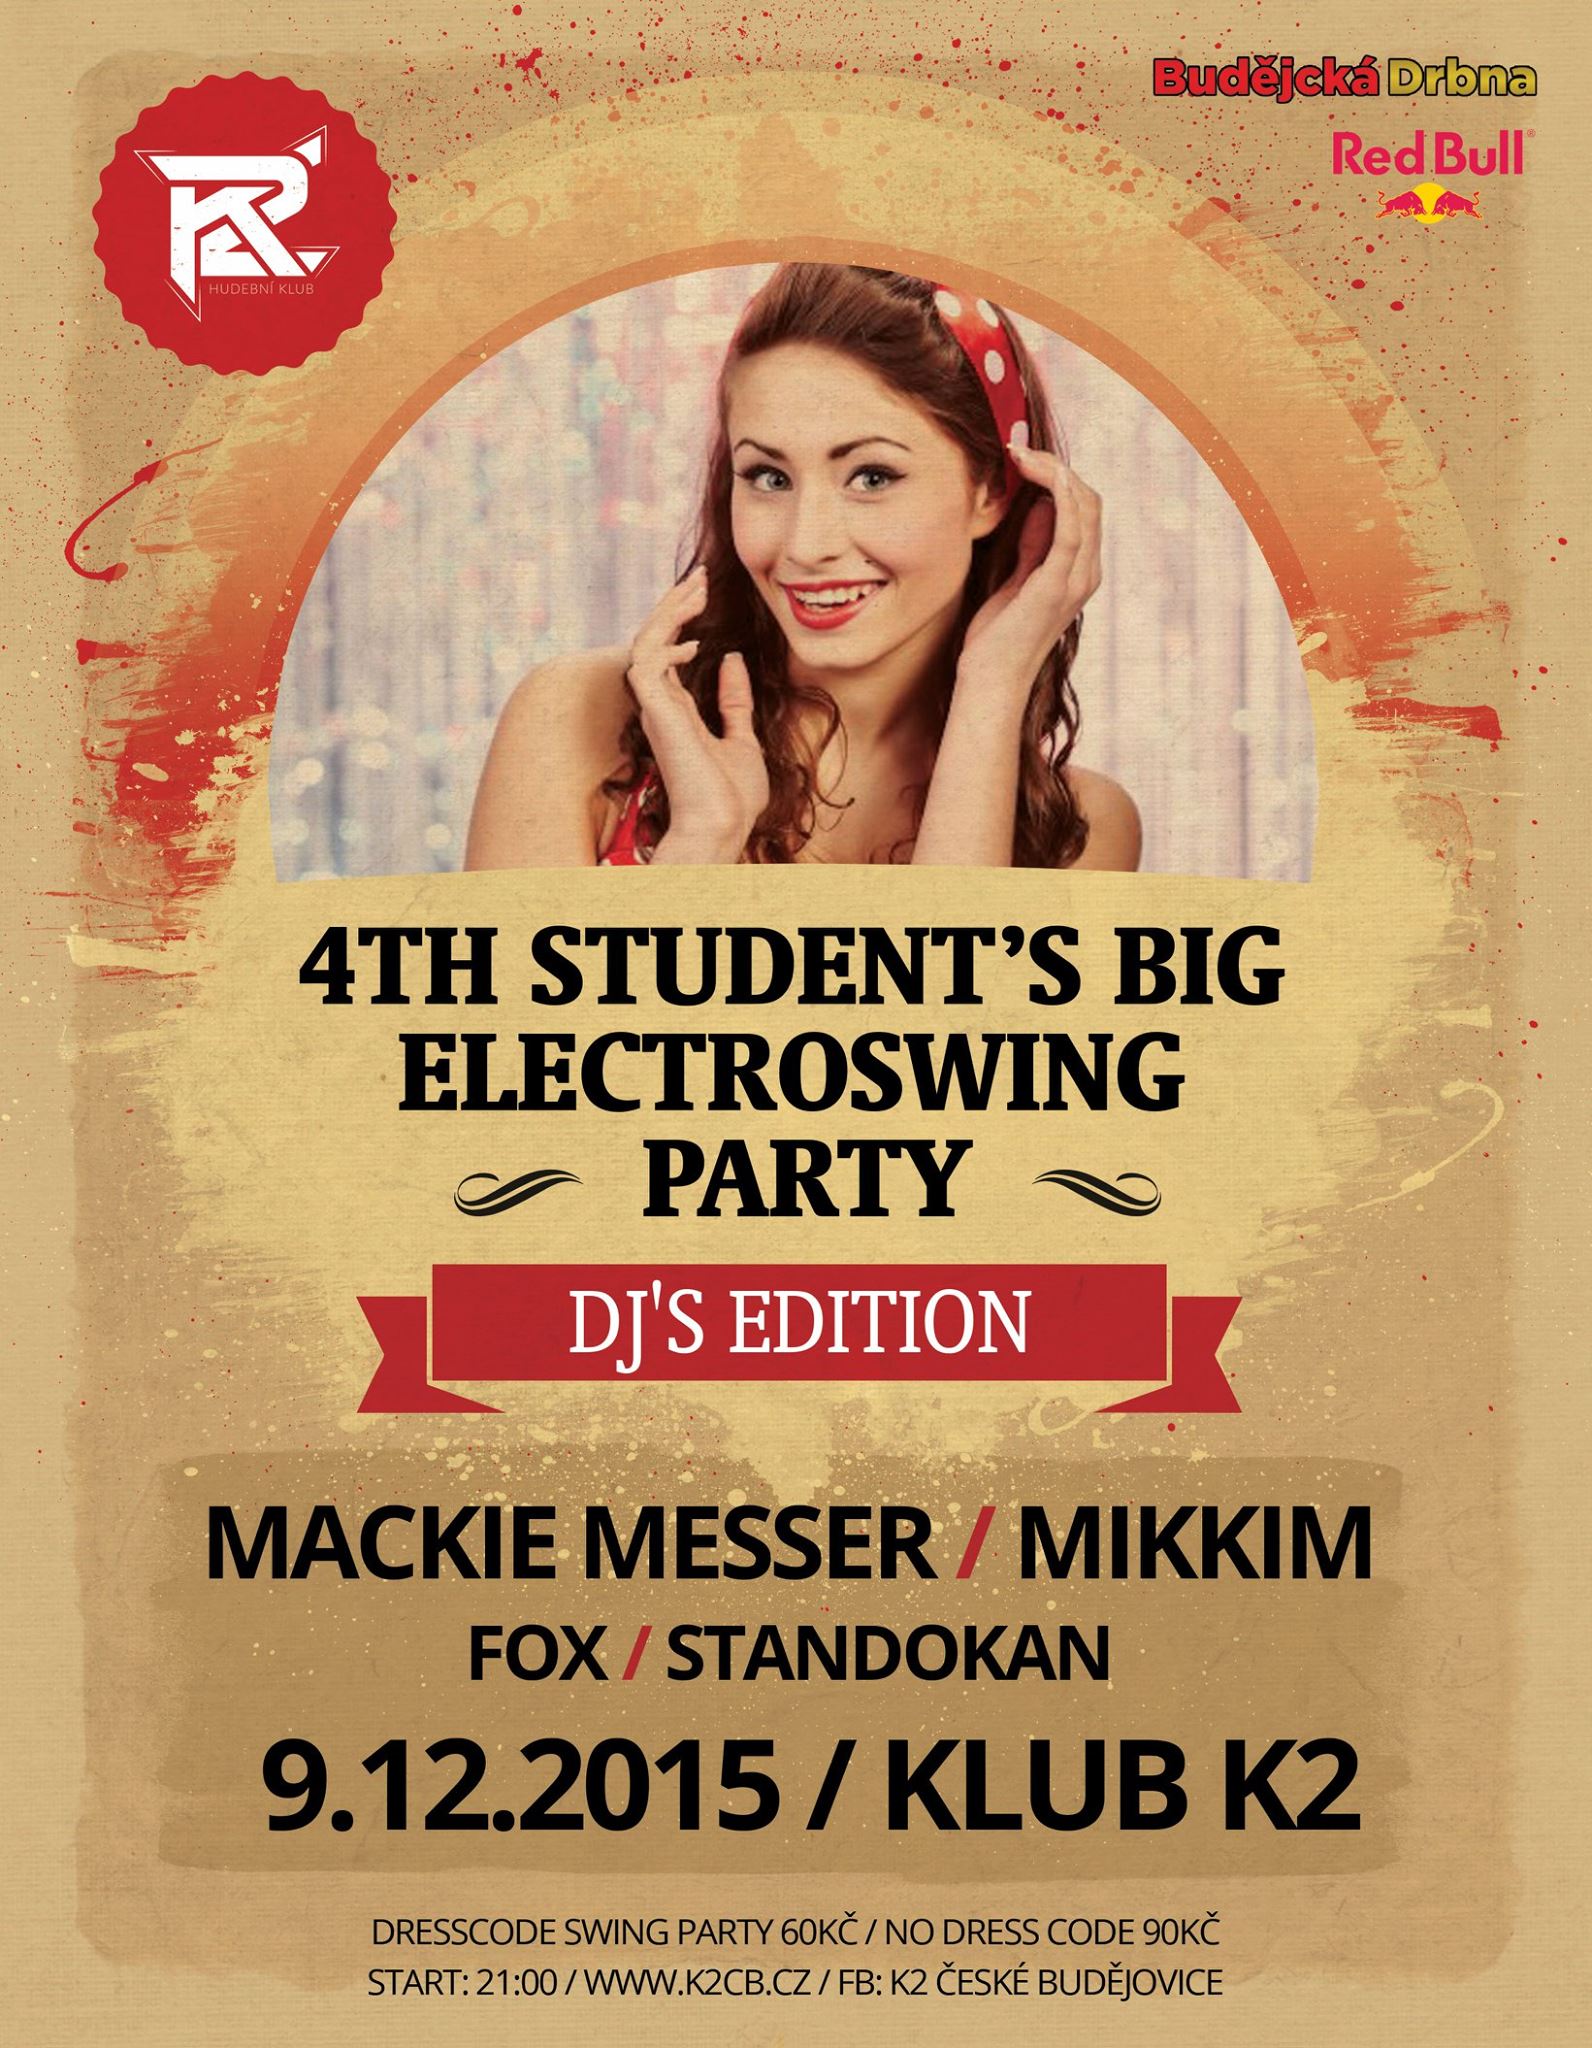 4th Student's Big Electroswing party